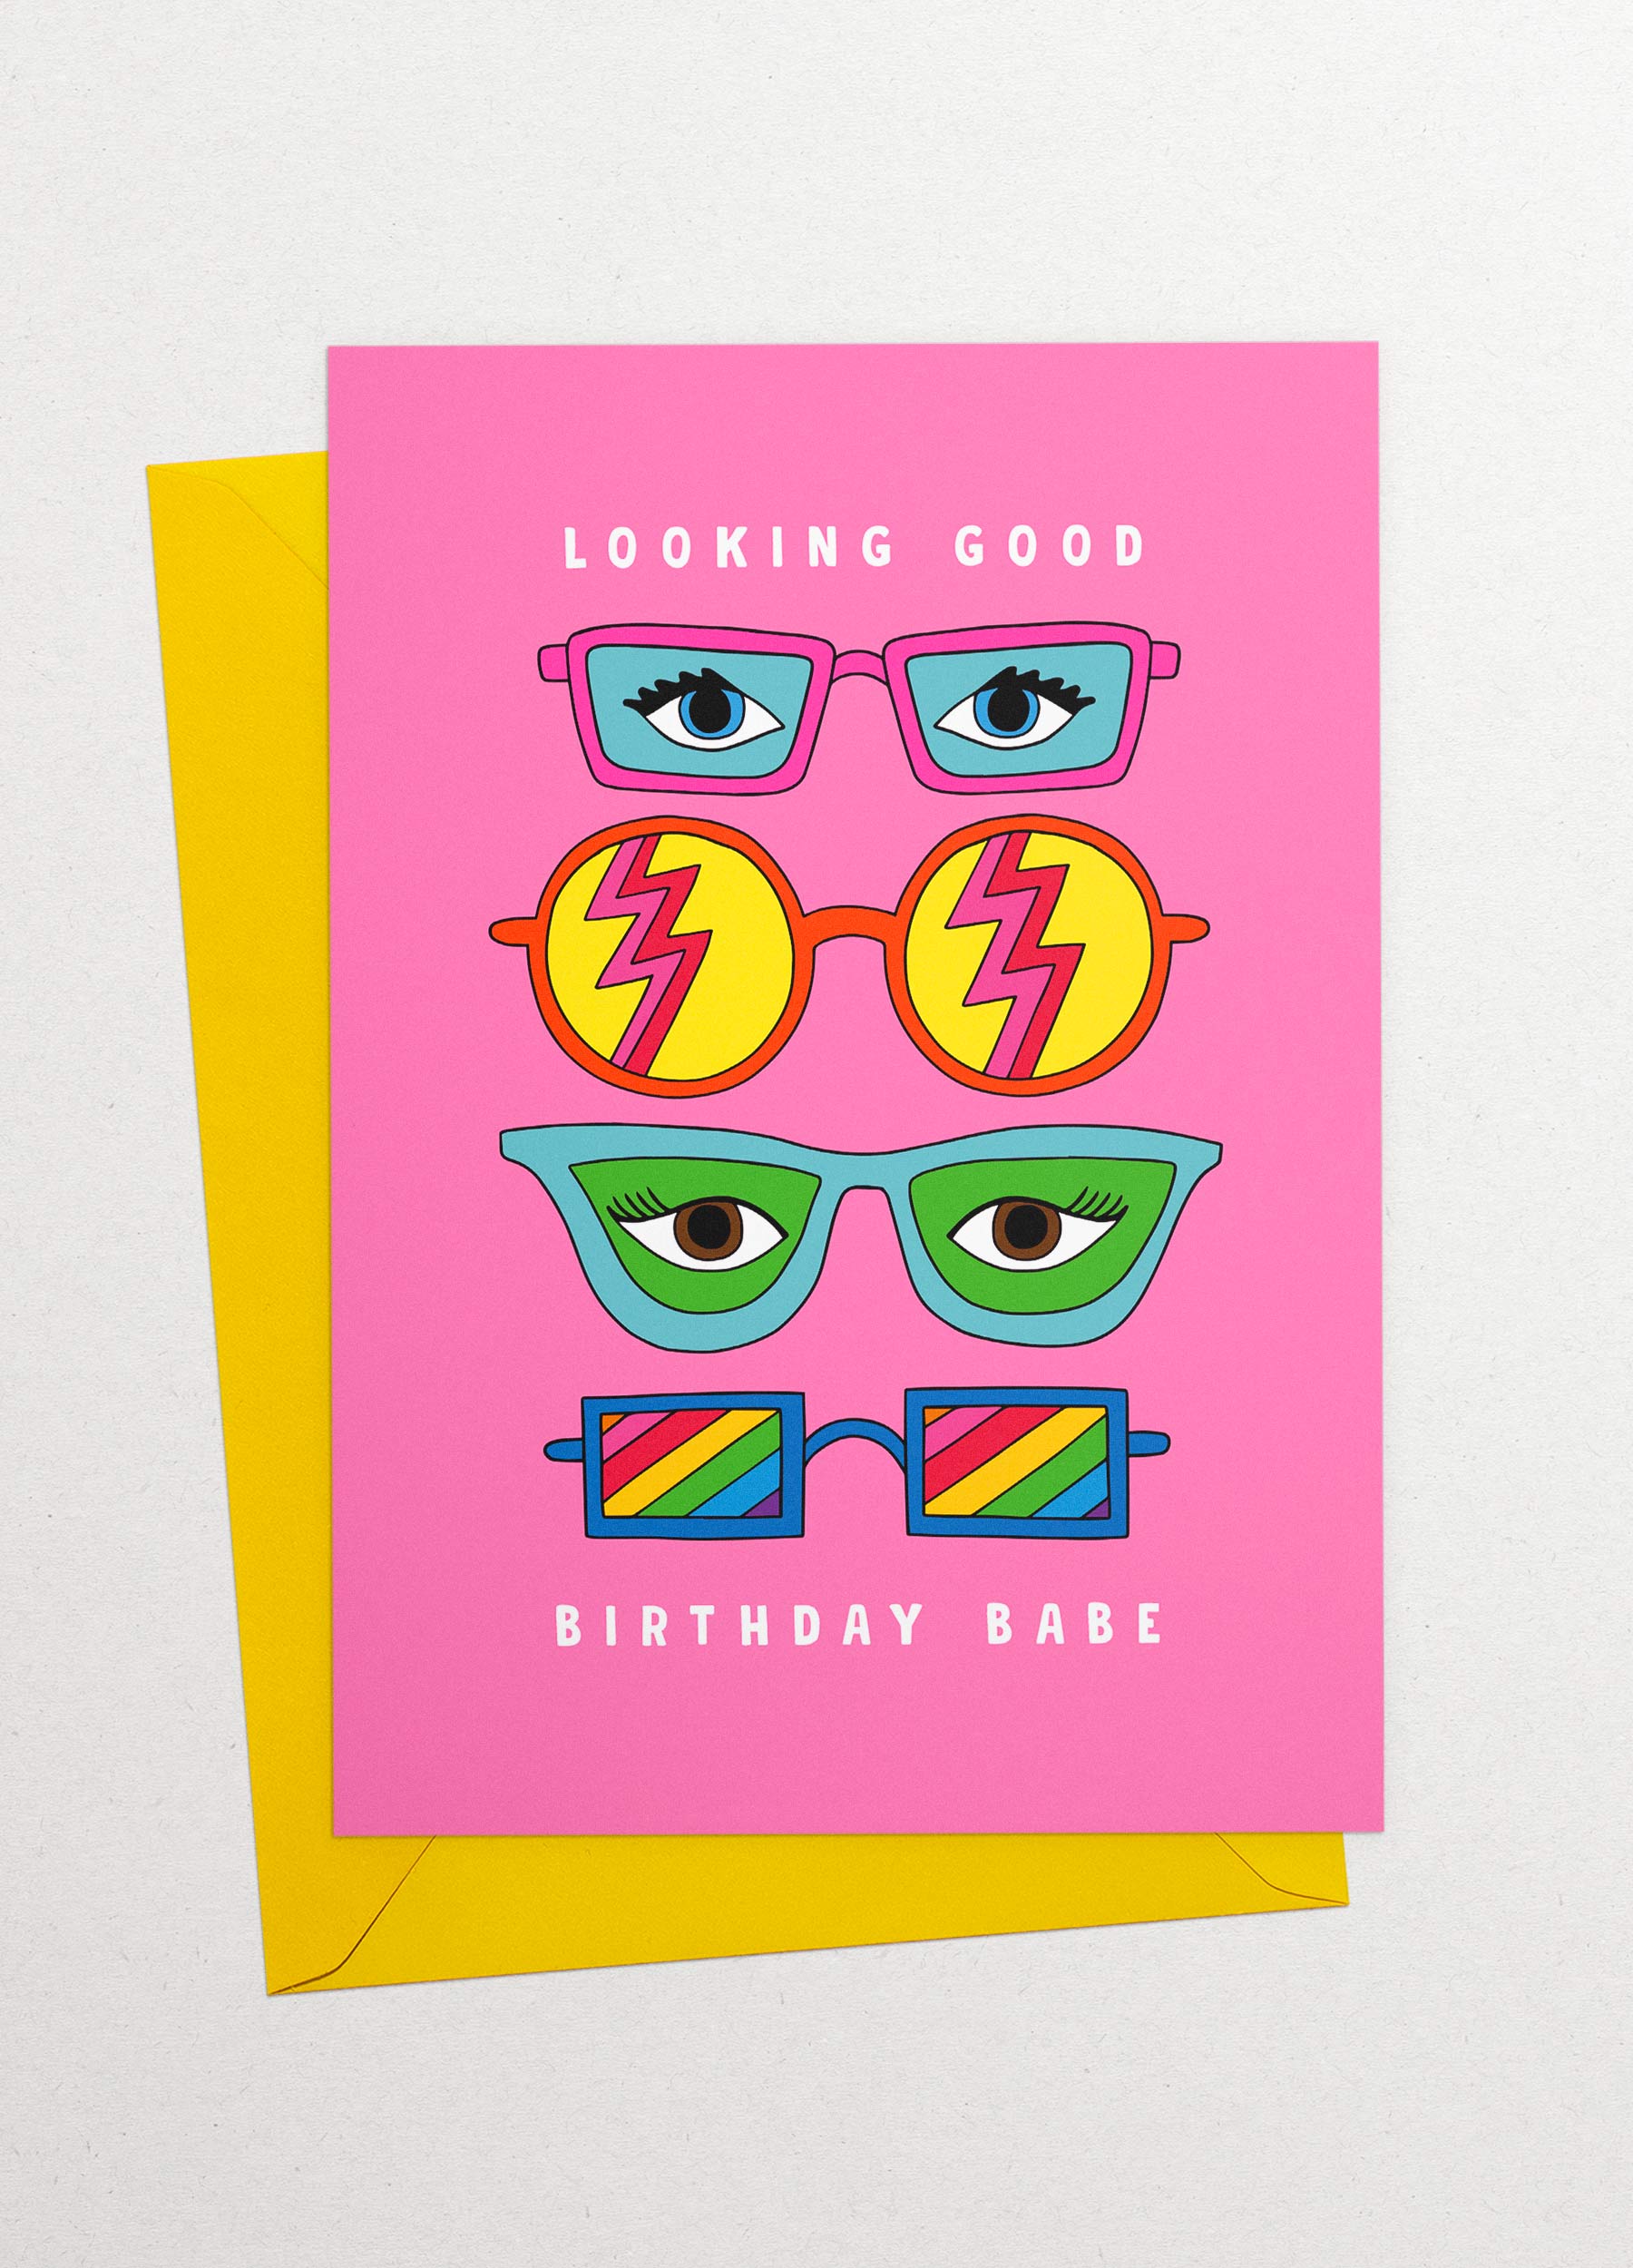 This image is a greeting card by Kiosk that has a pink background. It has three pairs of illustrated glasses on it. The glasses have different shapes, colors, and patterns on the lenses. Above the top pair of glasses is the text “Looking Good”, and below the bottom pair is the text Birthday Babe”. The card has a playful and cheerful design that conveys a message of celebration and compliments for your birthday. 🎂 Partly showing behind it is a yellow envelope.